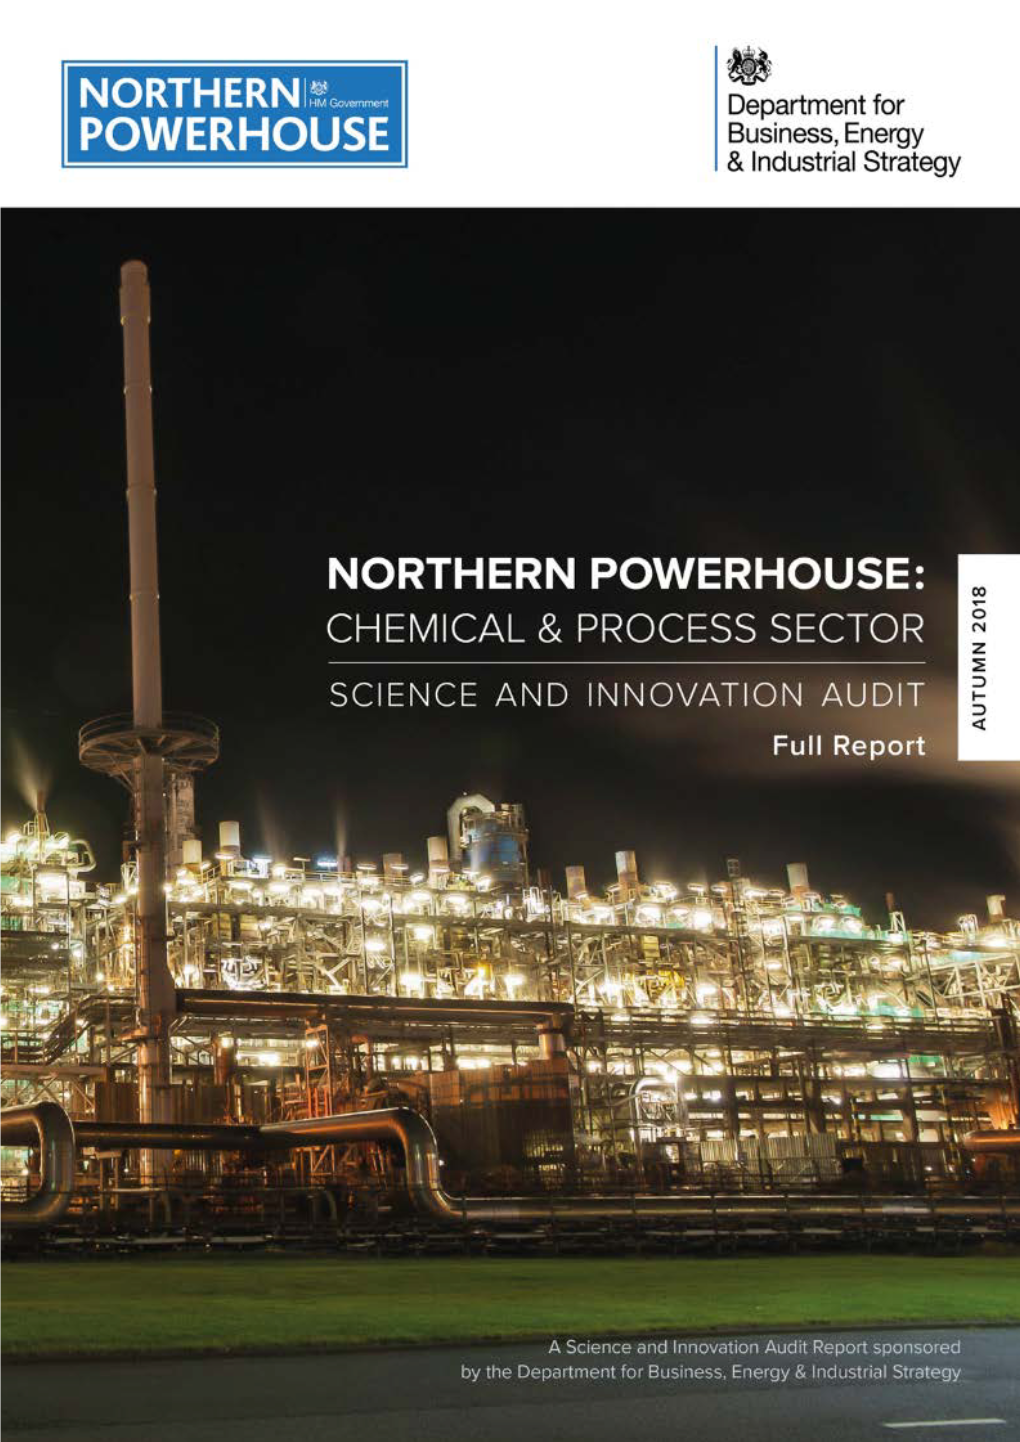 Northern Powerhouse Chemicals and Process Sector SIA